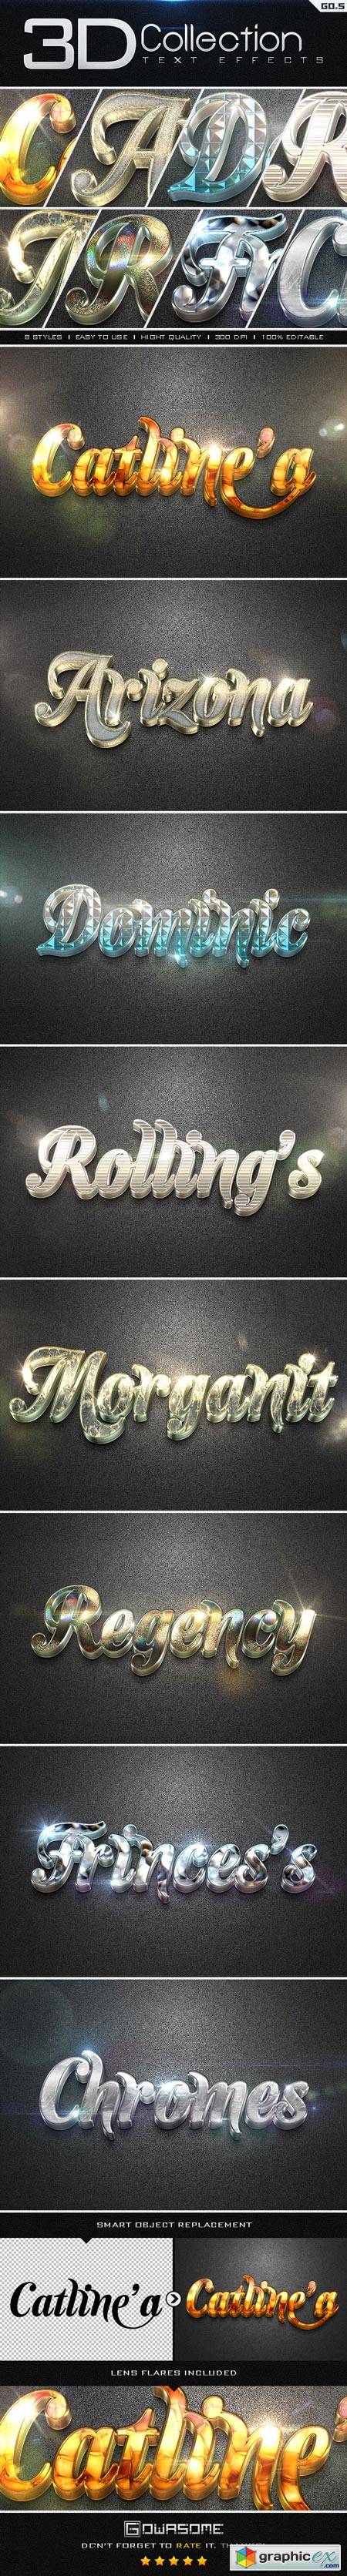 3D Collection Text Effects GO.5 8927121